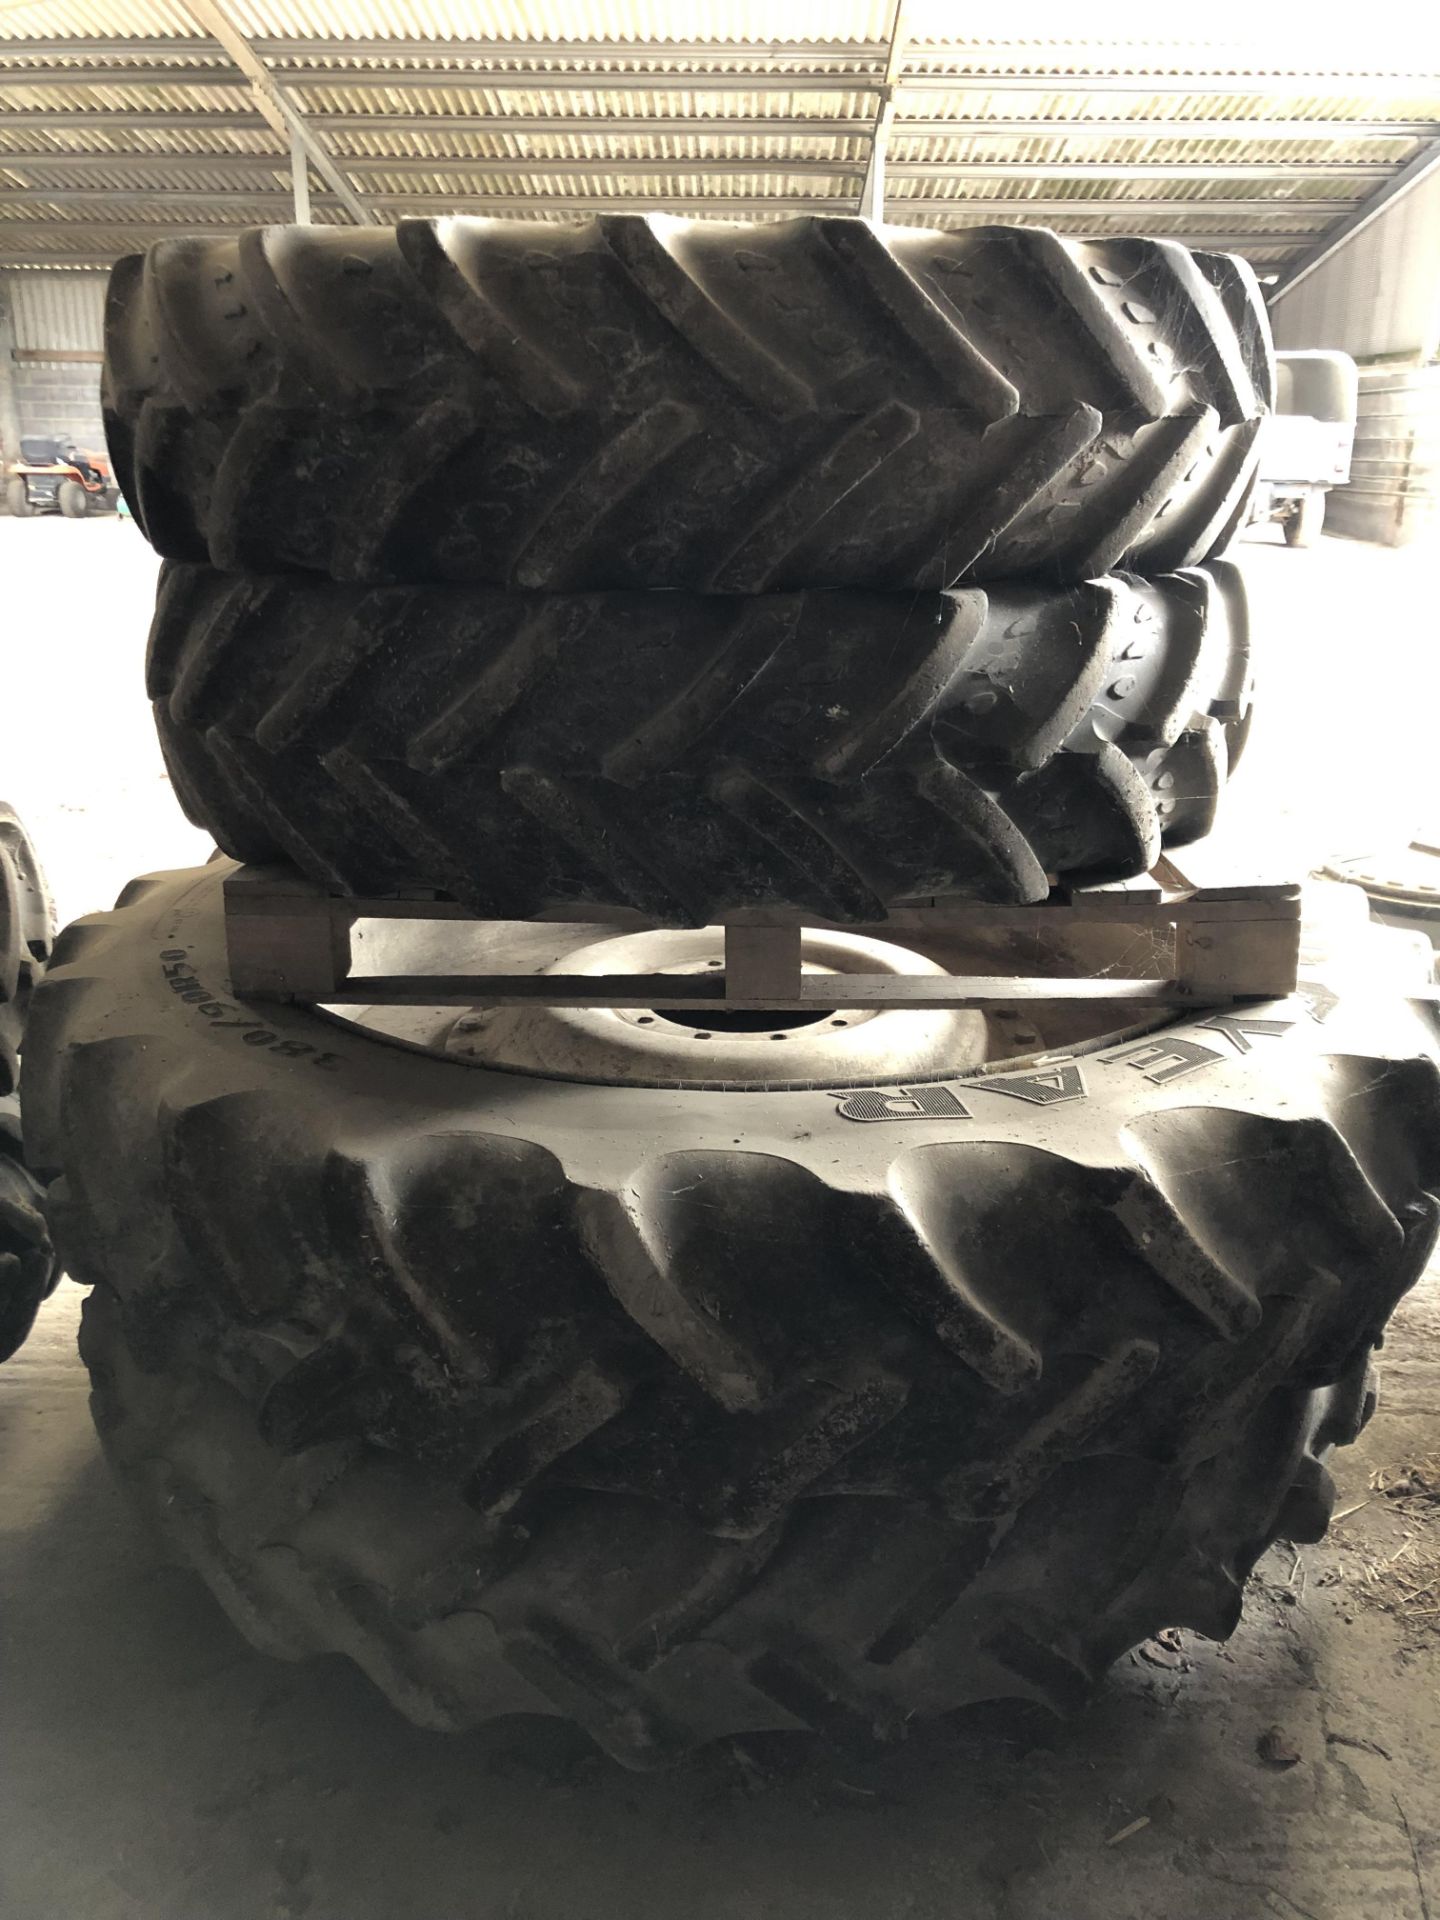 Set of 4 Row Wheels for NH T7 - Image 2 of 2